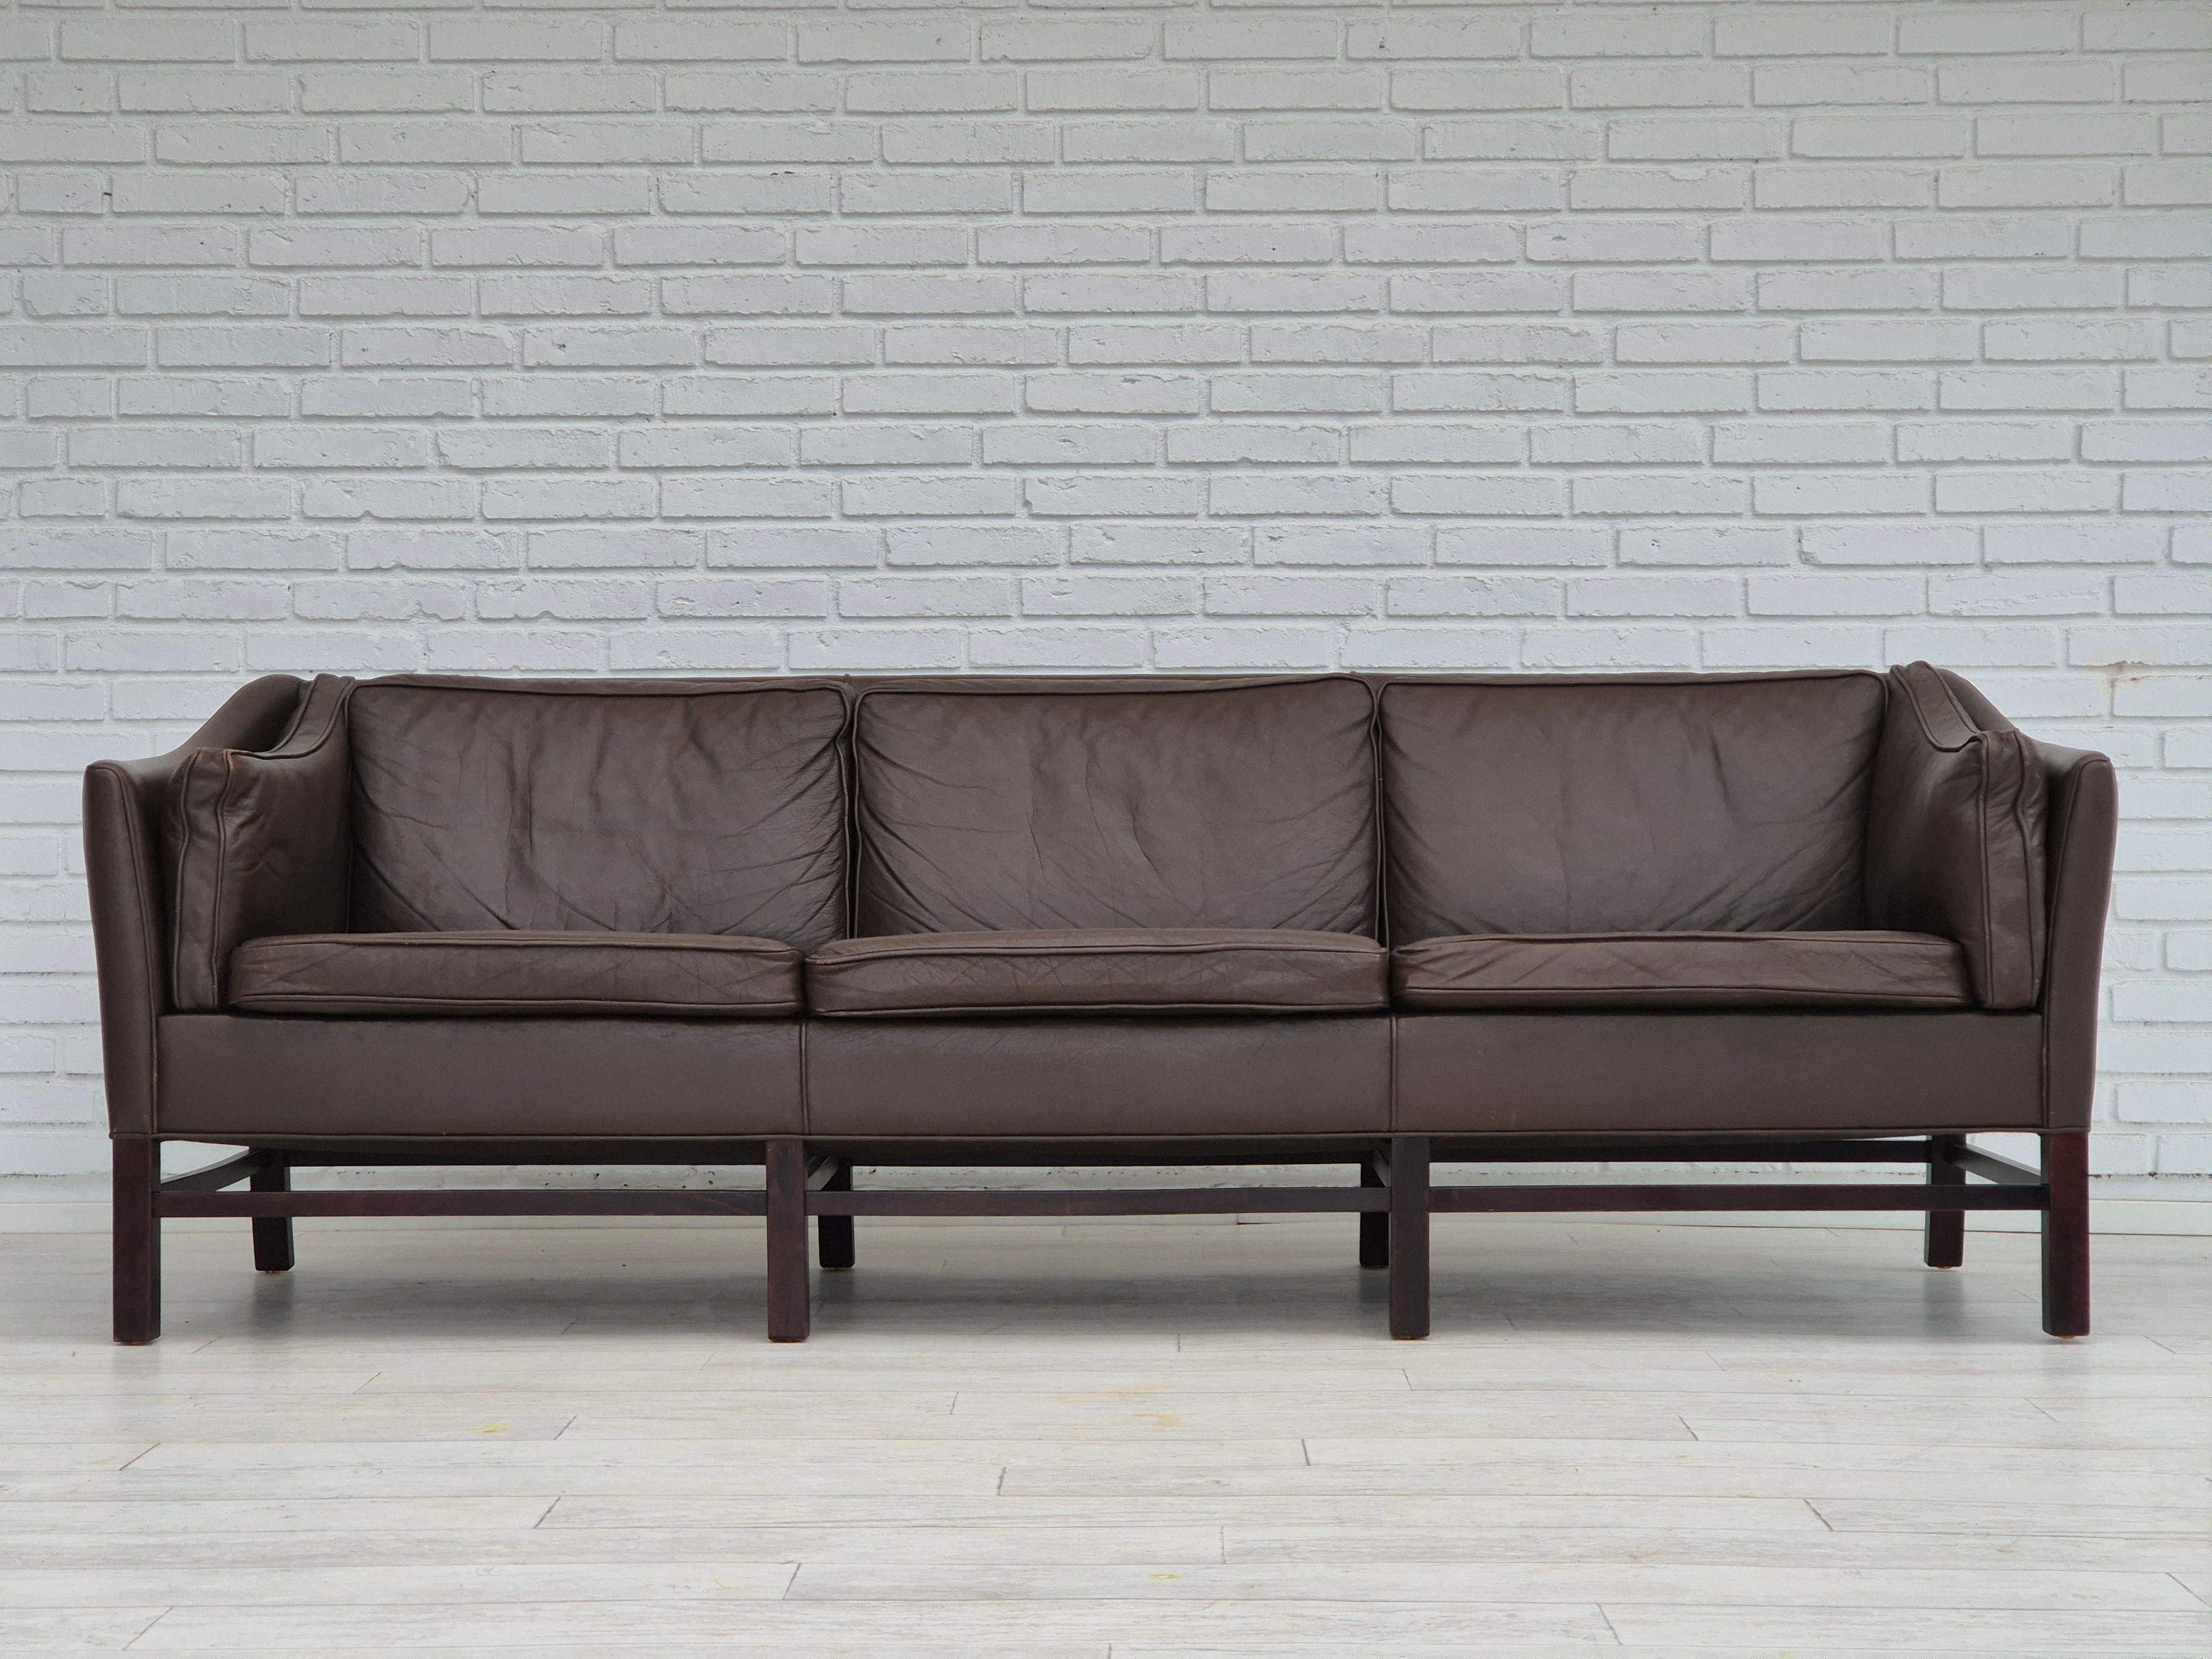 1970s, Danish design by Georg Thams for Grant Møbelfabrik. 3 seater sofa in original very good condition: no smells and no stains. Original brown leather, beech wood legs. Manufactured by Danish furniture manufacturer Grant Møbelfabrik in about